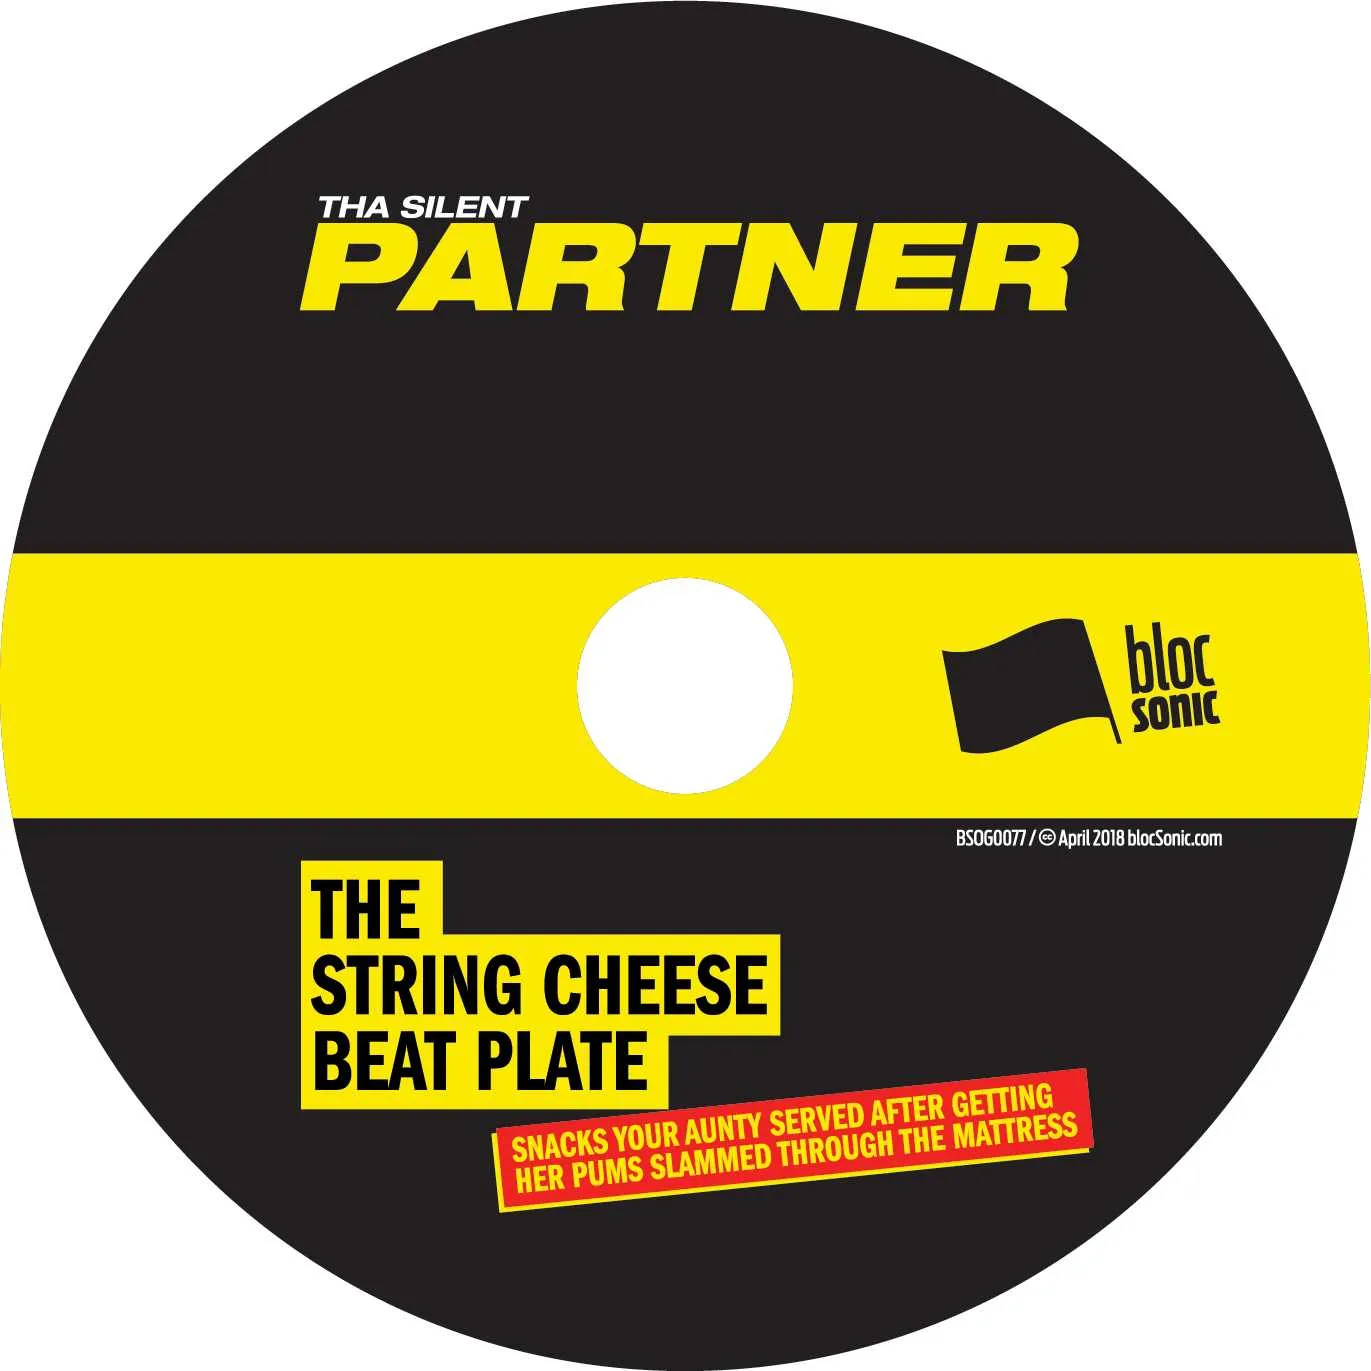 Album disc for “The String Cheese Beat Plate” by Tha Silent Partner